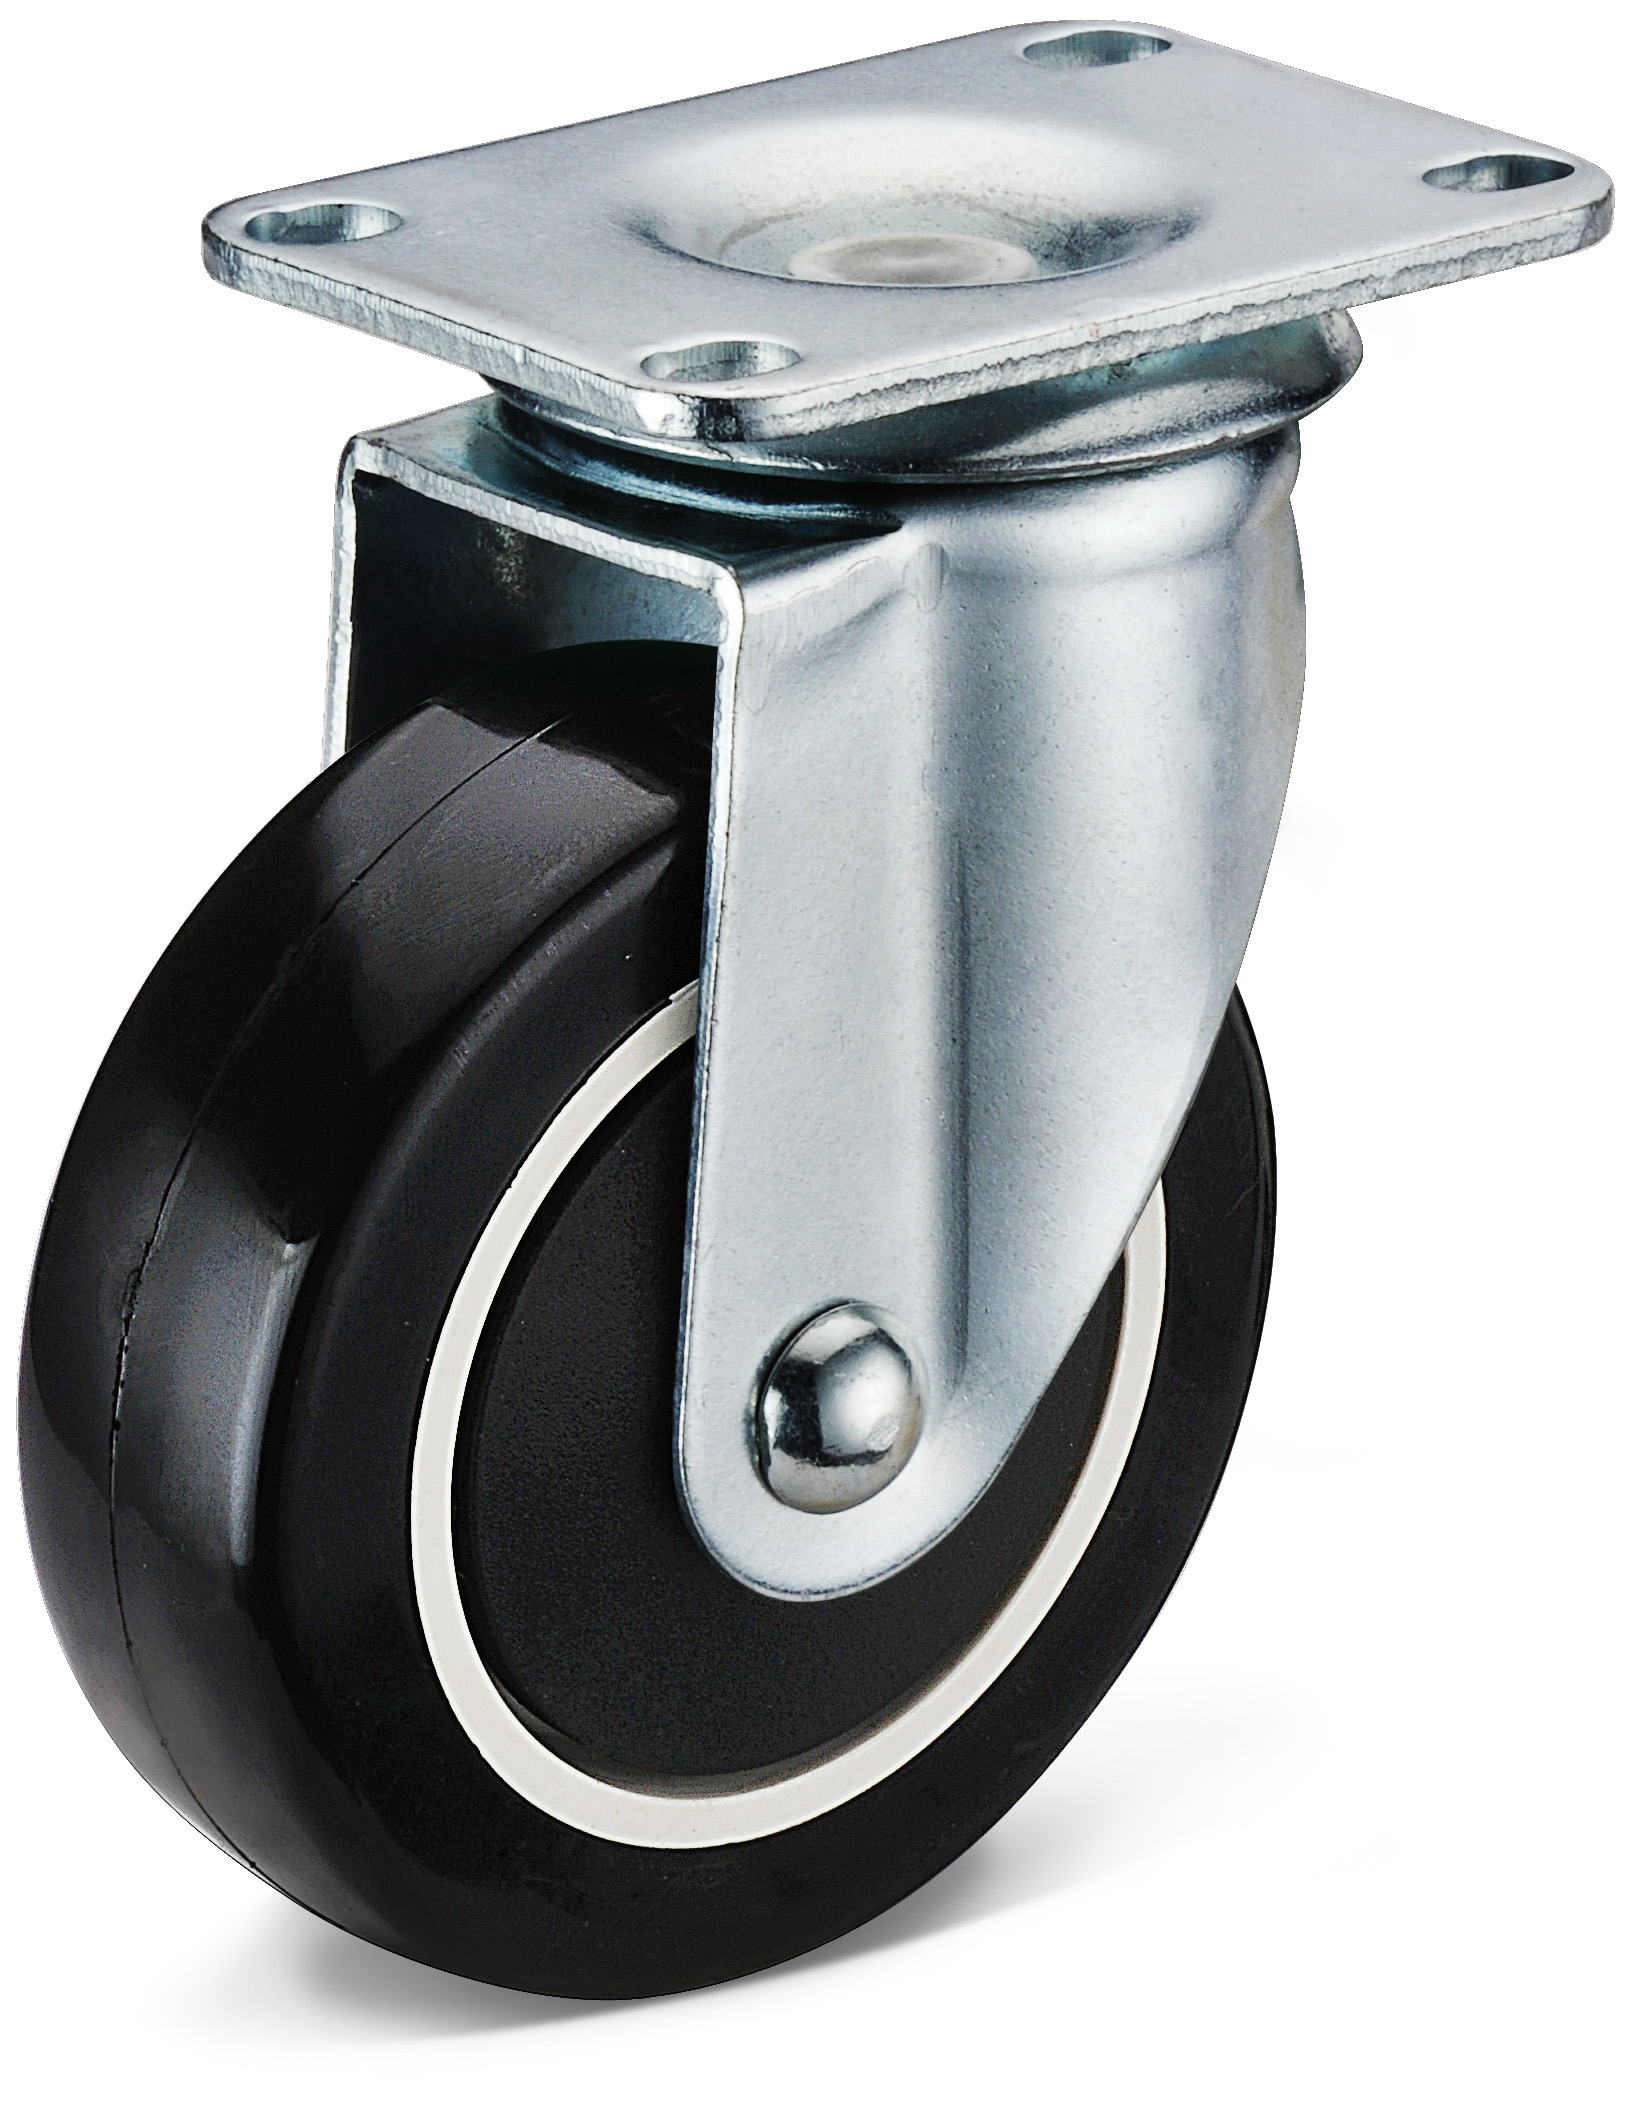 Furniture Casters with PP core